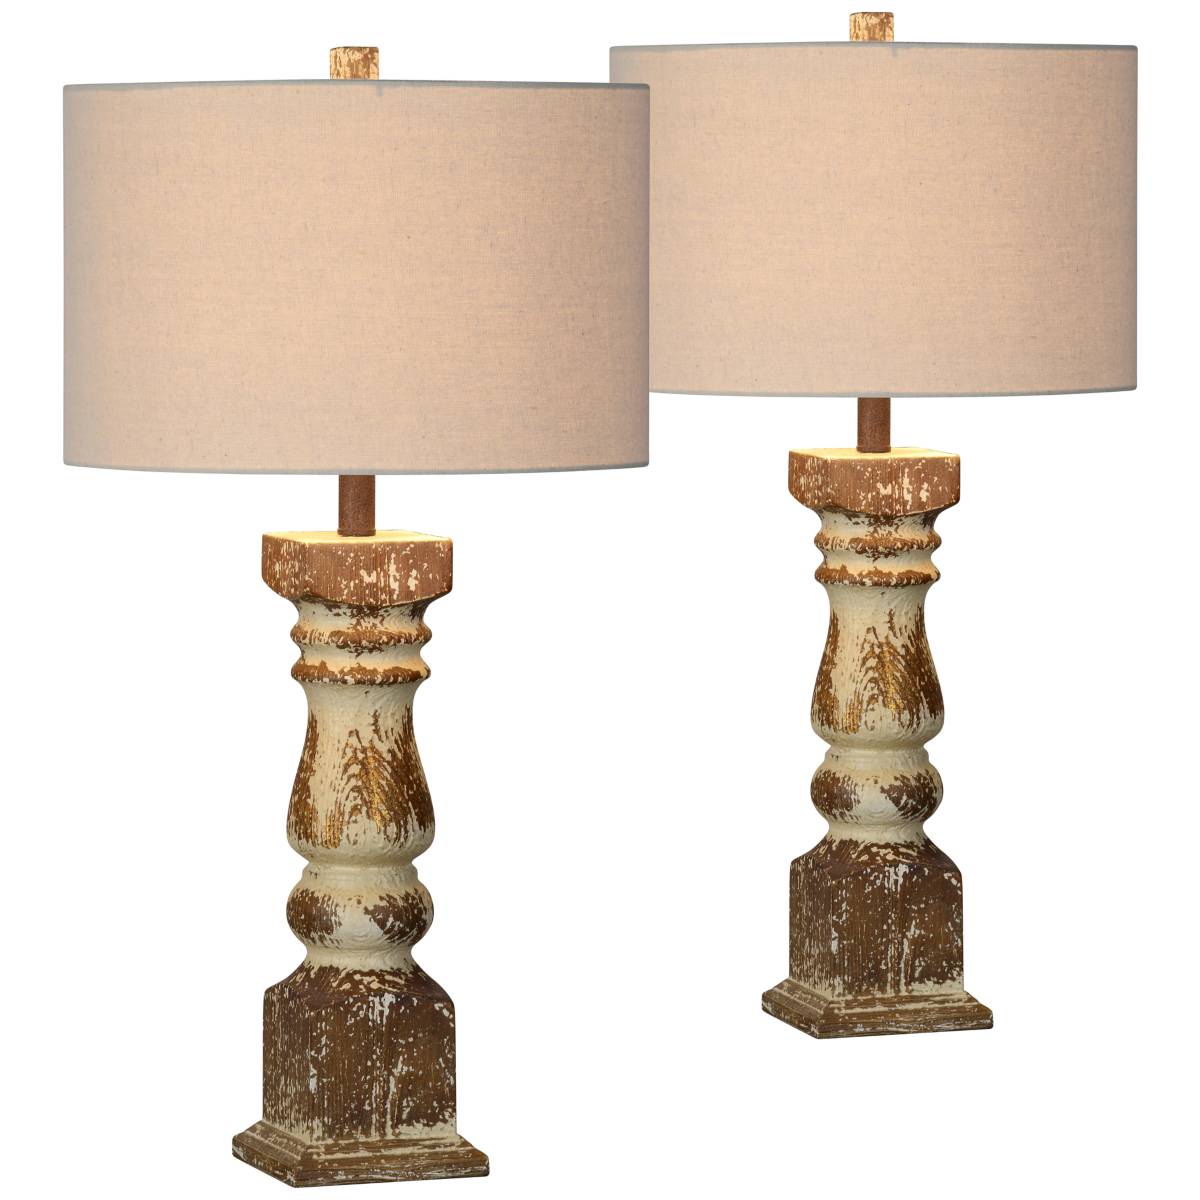 Traditional Table Lamps - Classic Lamp Designs - Page 11 | Lamps Plus